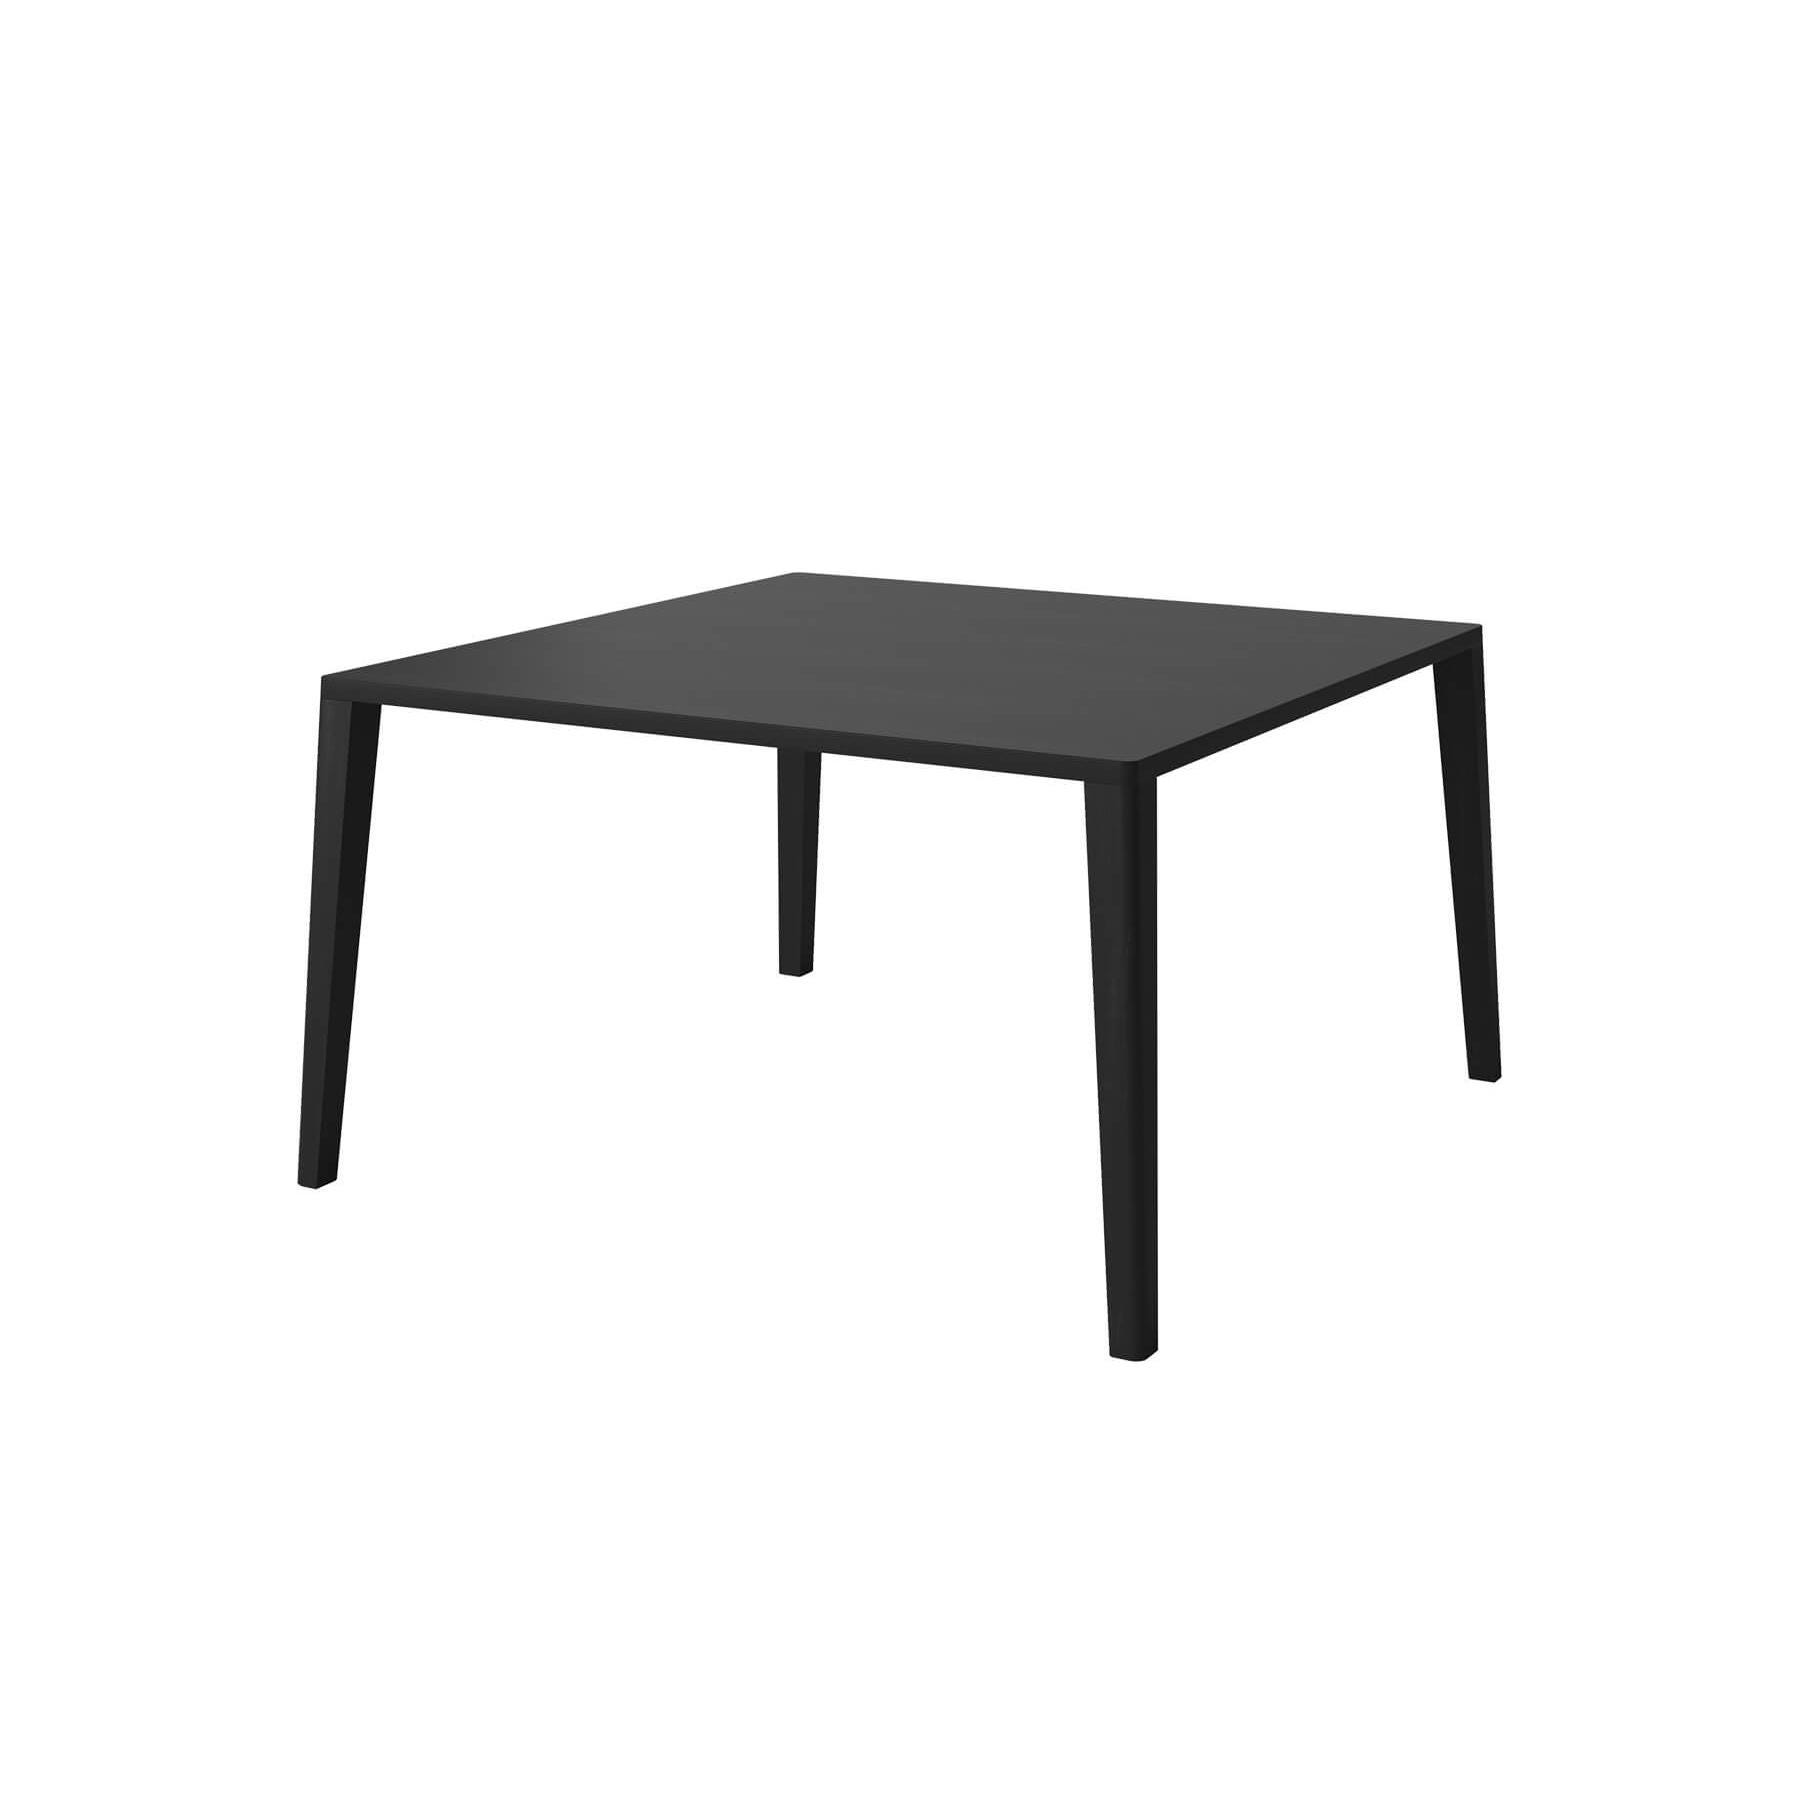 Bolia Graceful Dining Table 130 X 130cm Black Stained With Extension Leaves Designer Furniture From Holloways Of Ludlow